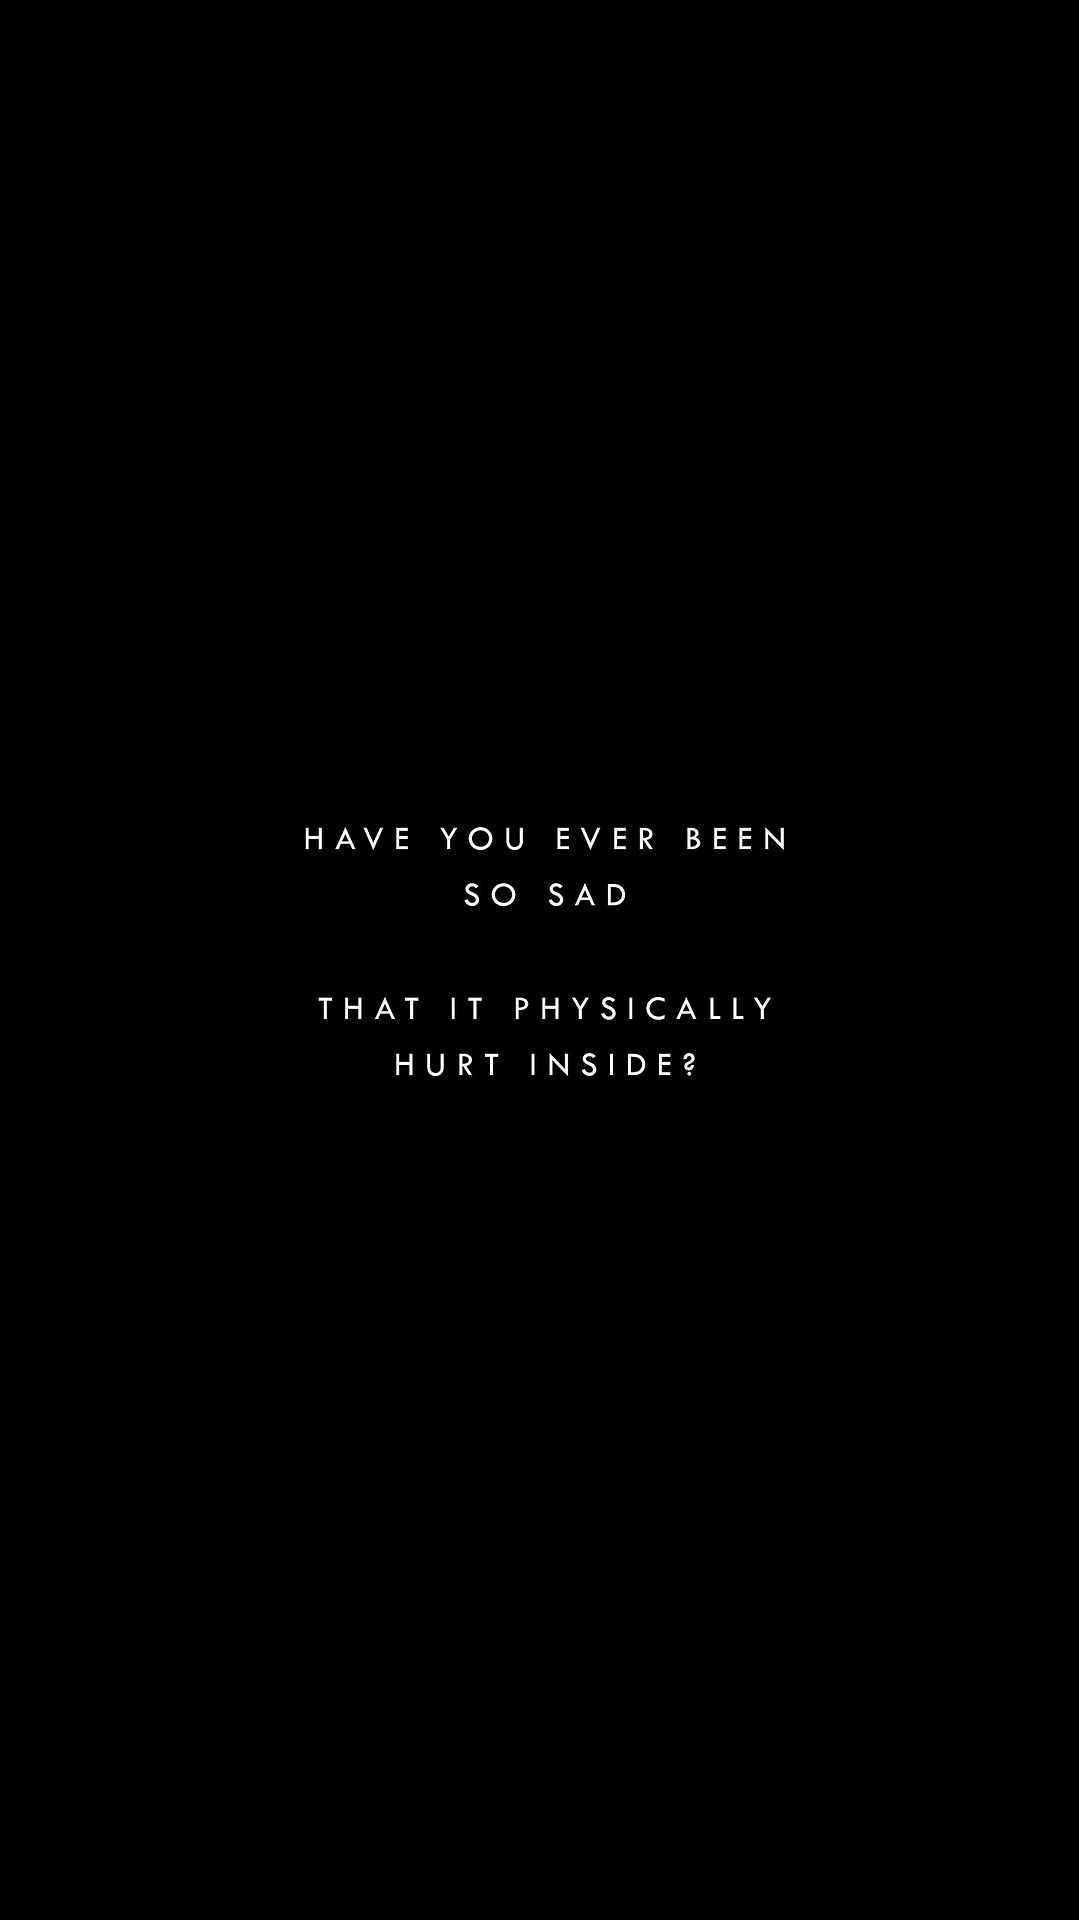 Have you ever been so sad that it physically hurt inside? - Sad